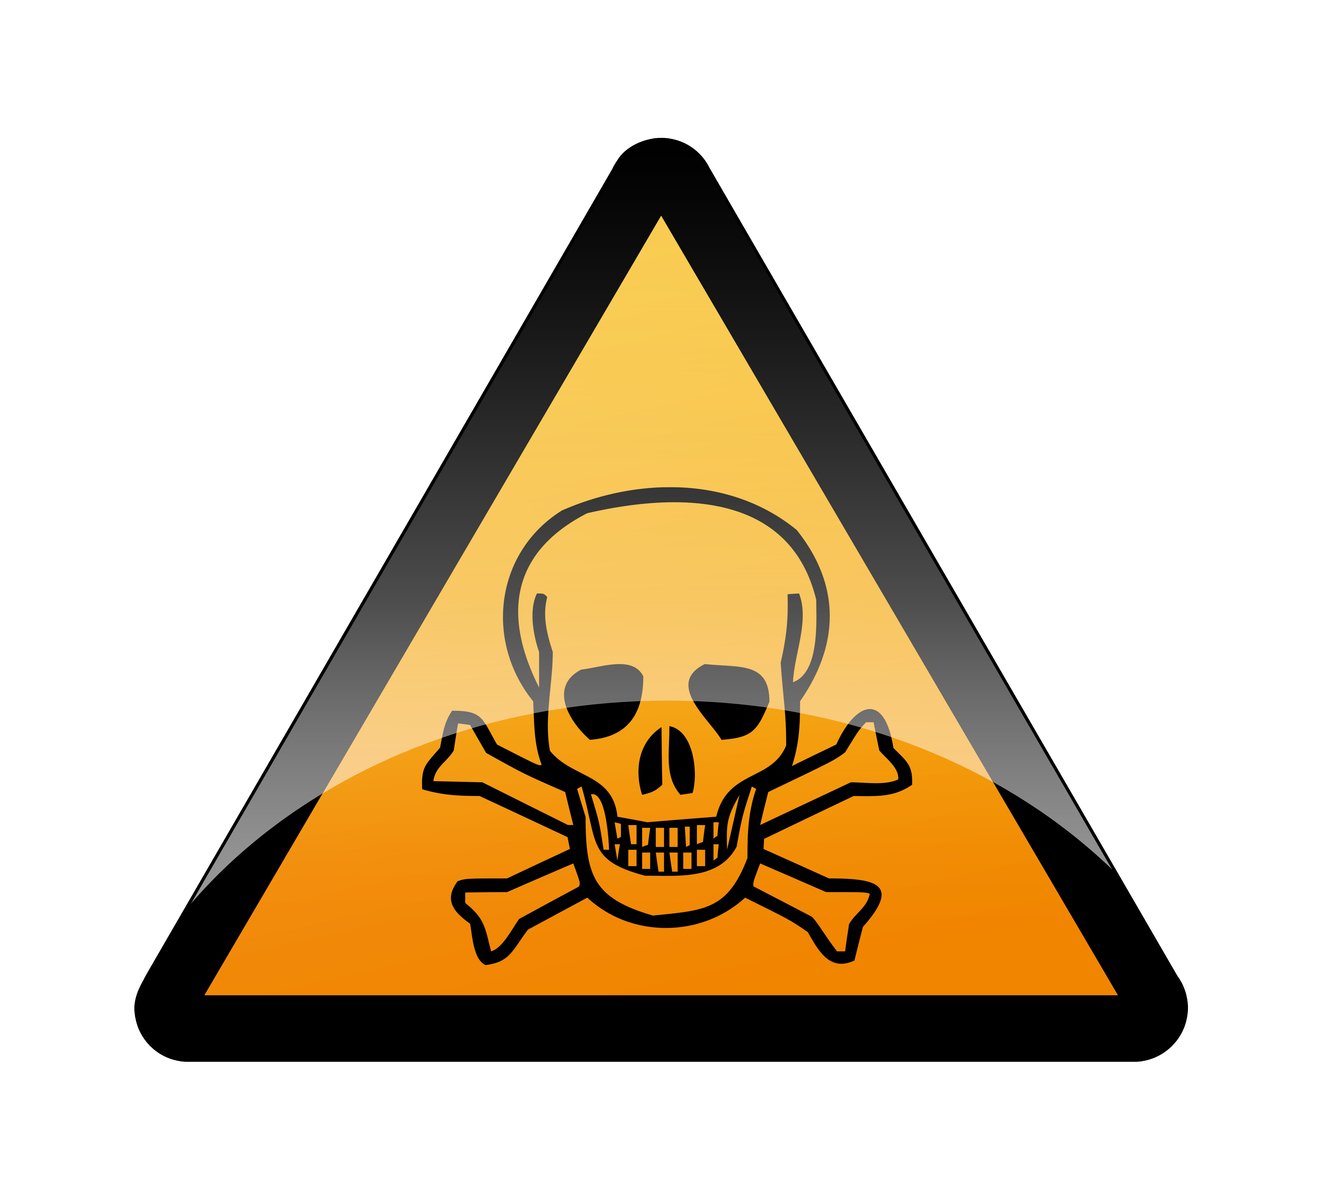 a hazard sign with a skull and bones